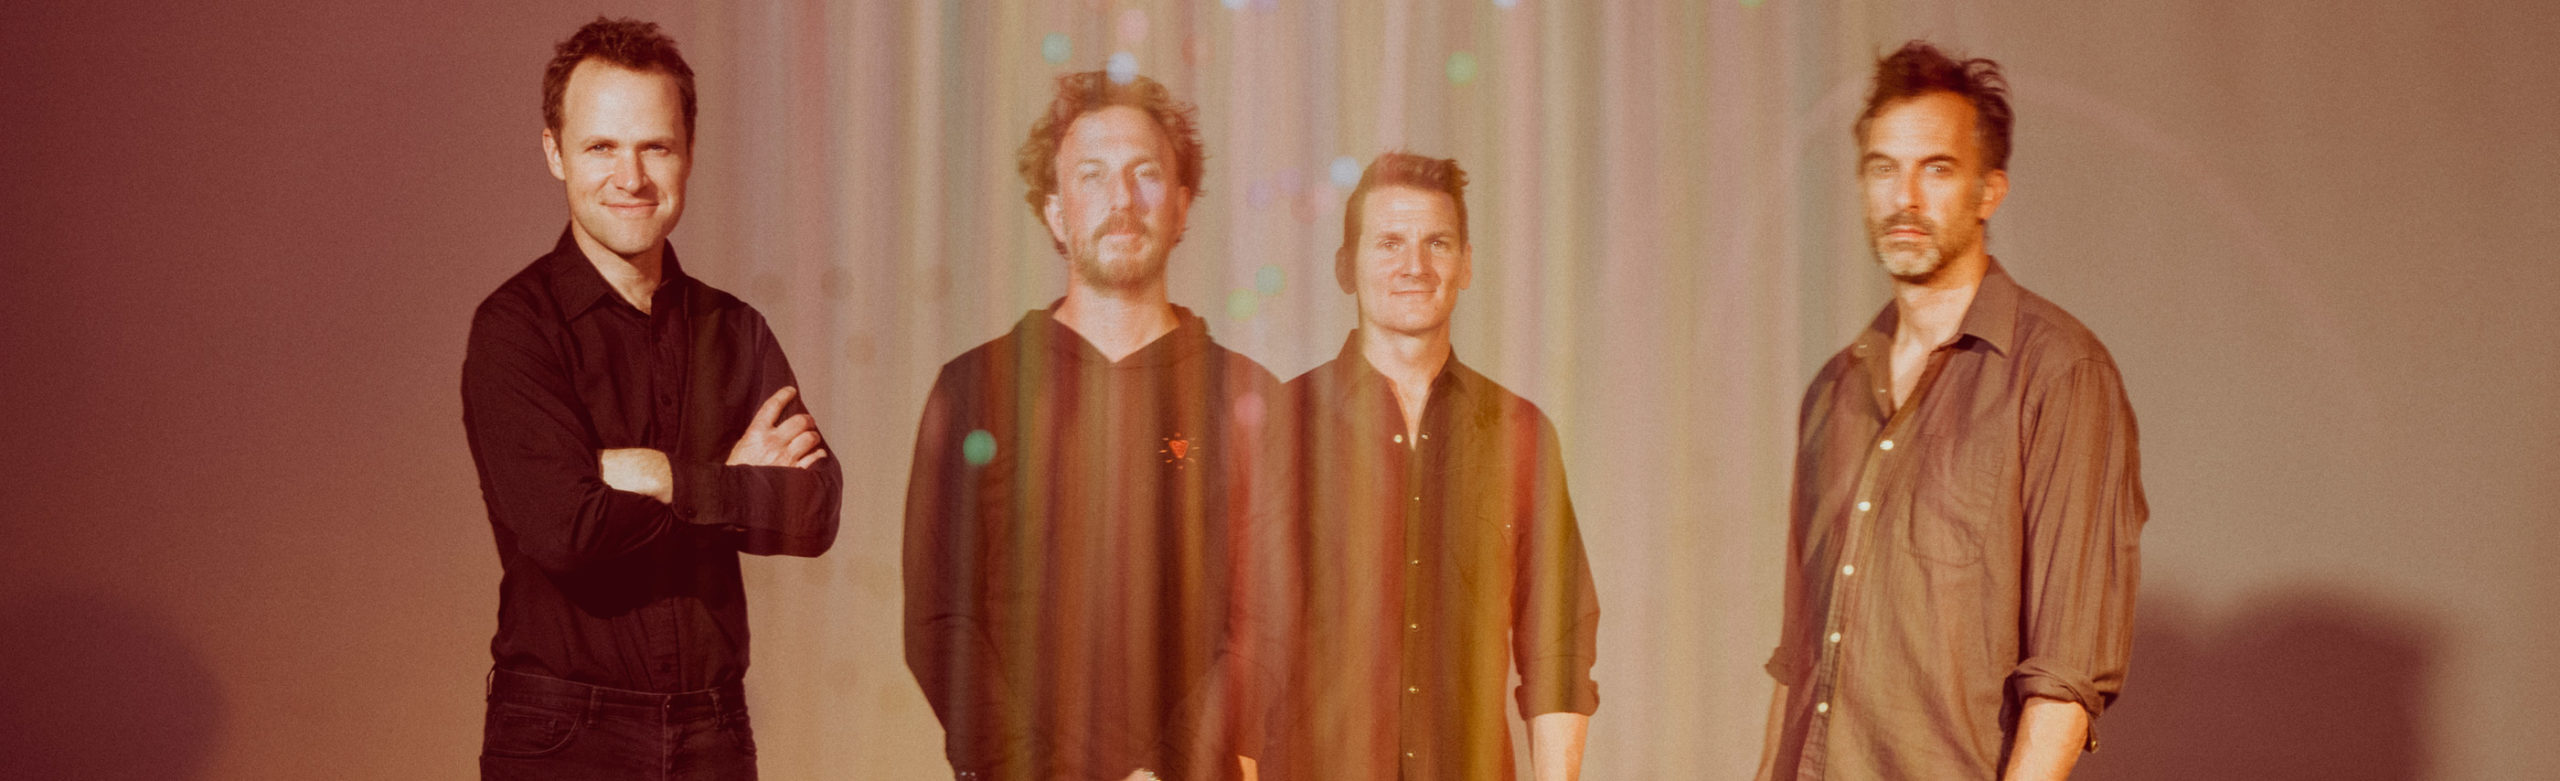 Guster Drops Title Track “Look Alive” Ahead of New Album Image